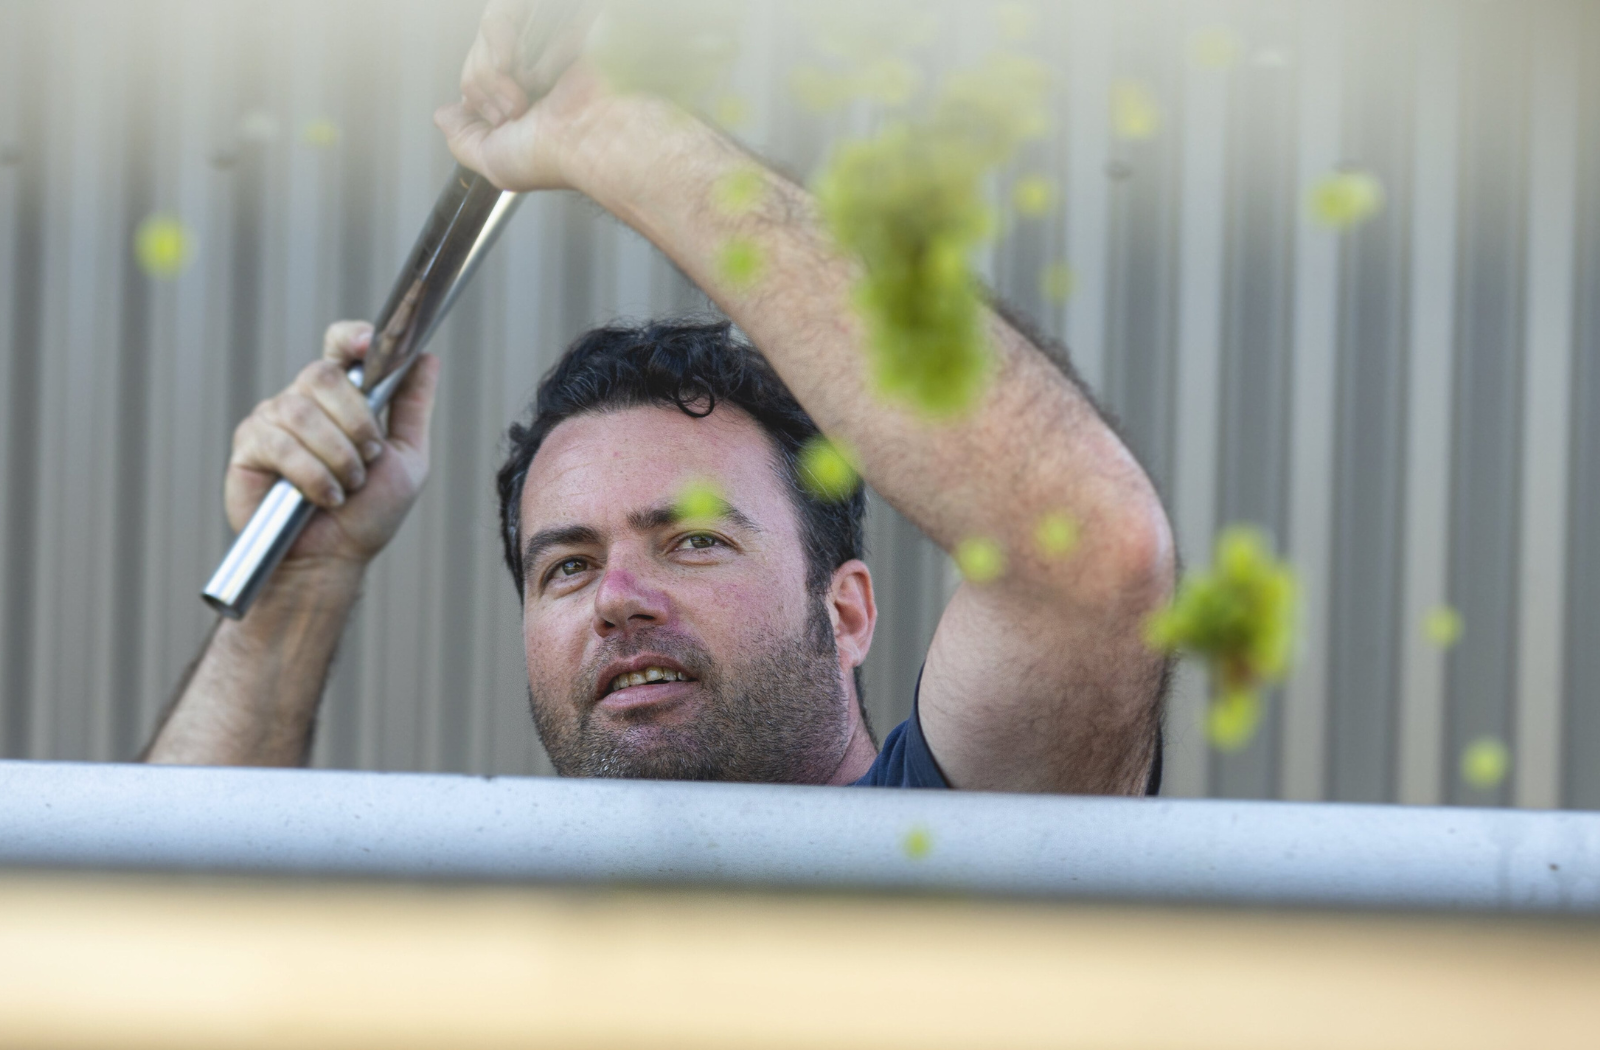 Winemaker Alan Varney working at the winery